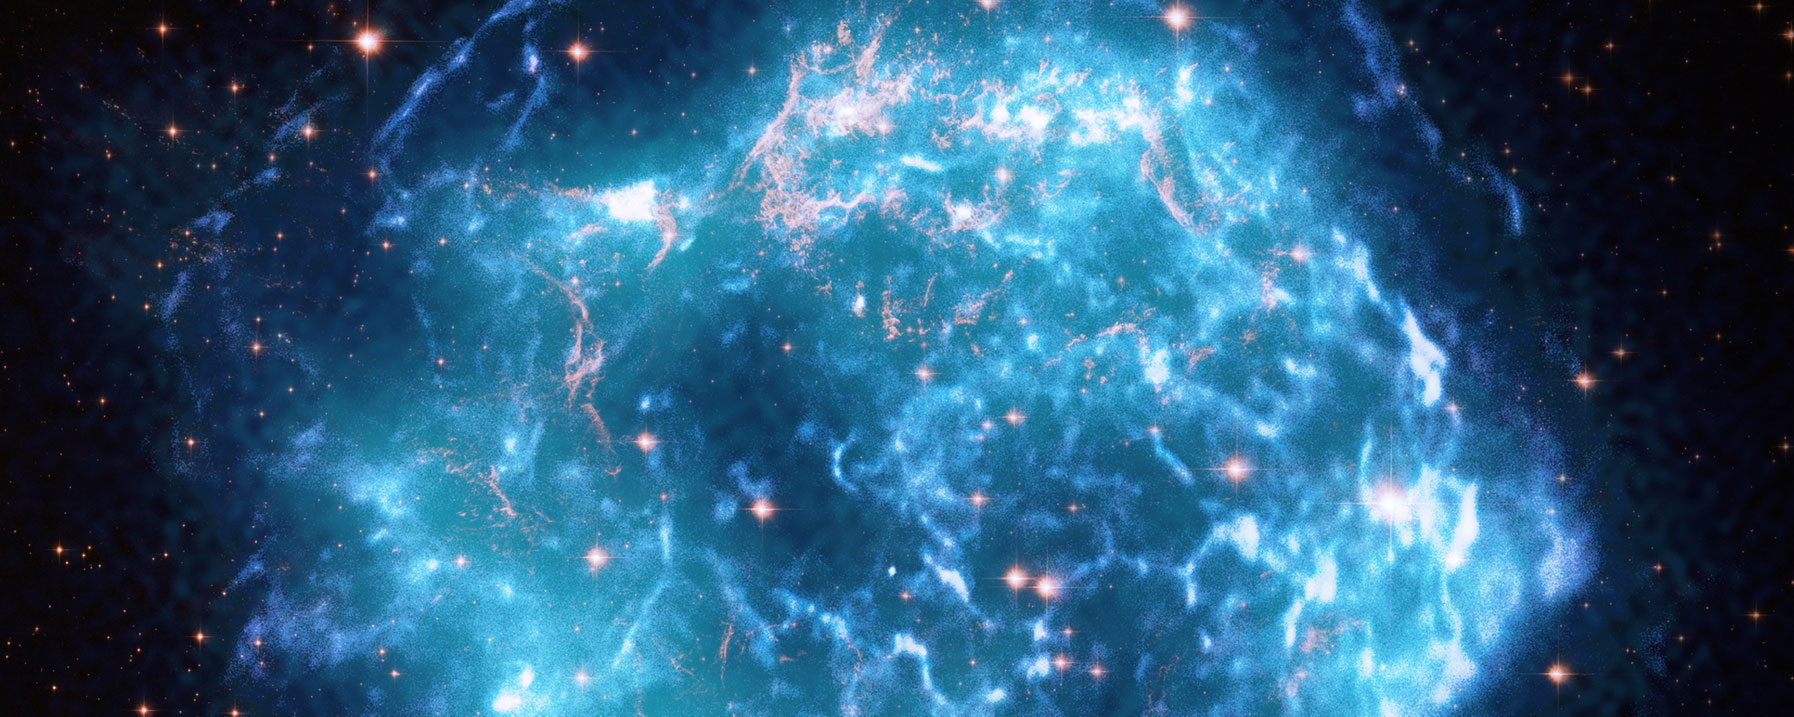 Composite images of the Cas A supernova remnant. The blues represent data from the Chandra Observatory, the turquoise is from NASA's Imaging X-ray Polarimetry Explorer (called IXPE), and the gold is courtesy of the Hubble Telescope.